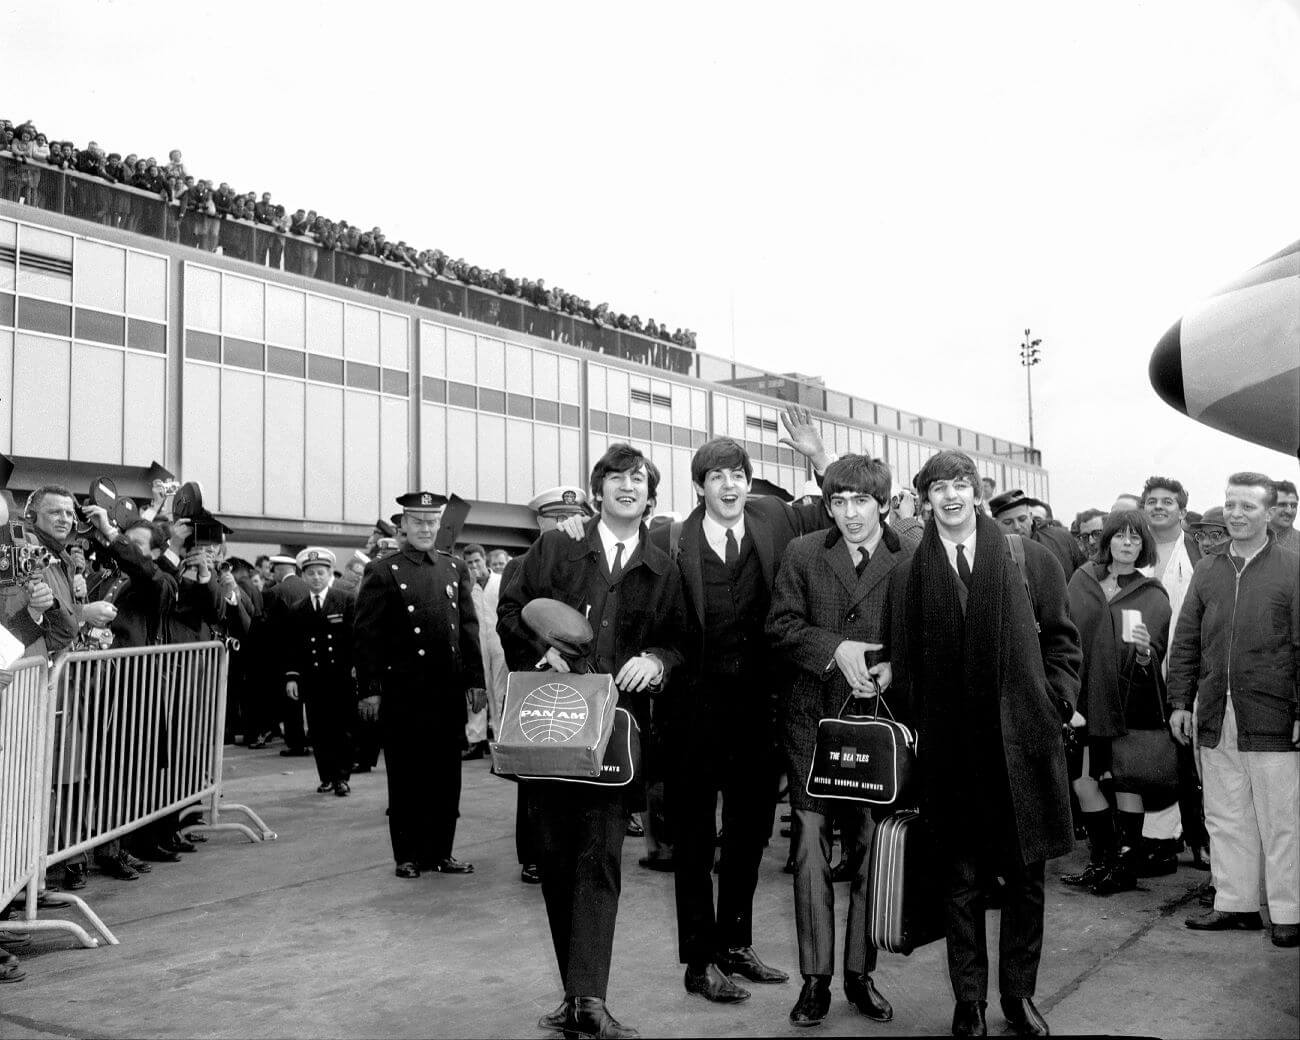 A black and white picture of The Beatles walking together at an airport while a large crowd watches them.